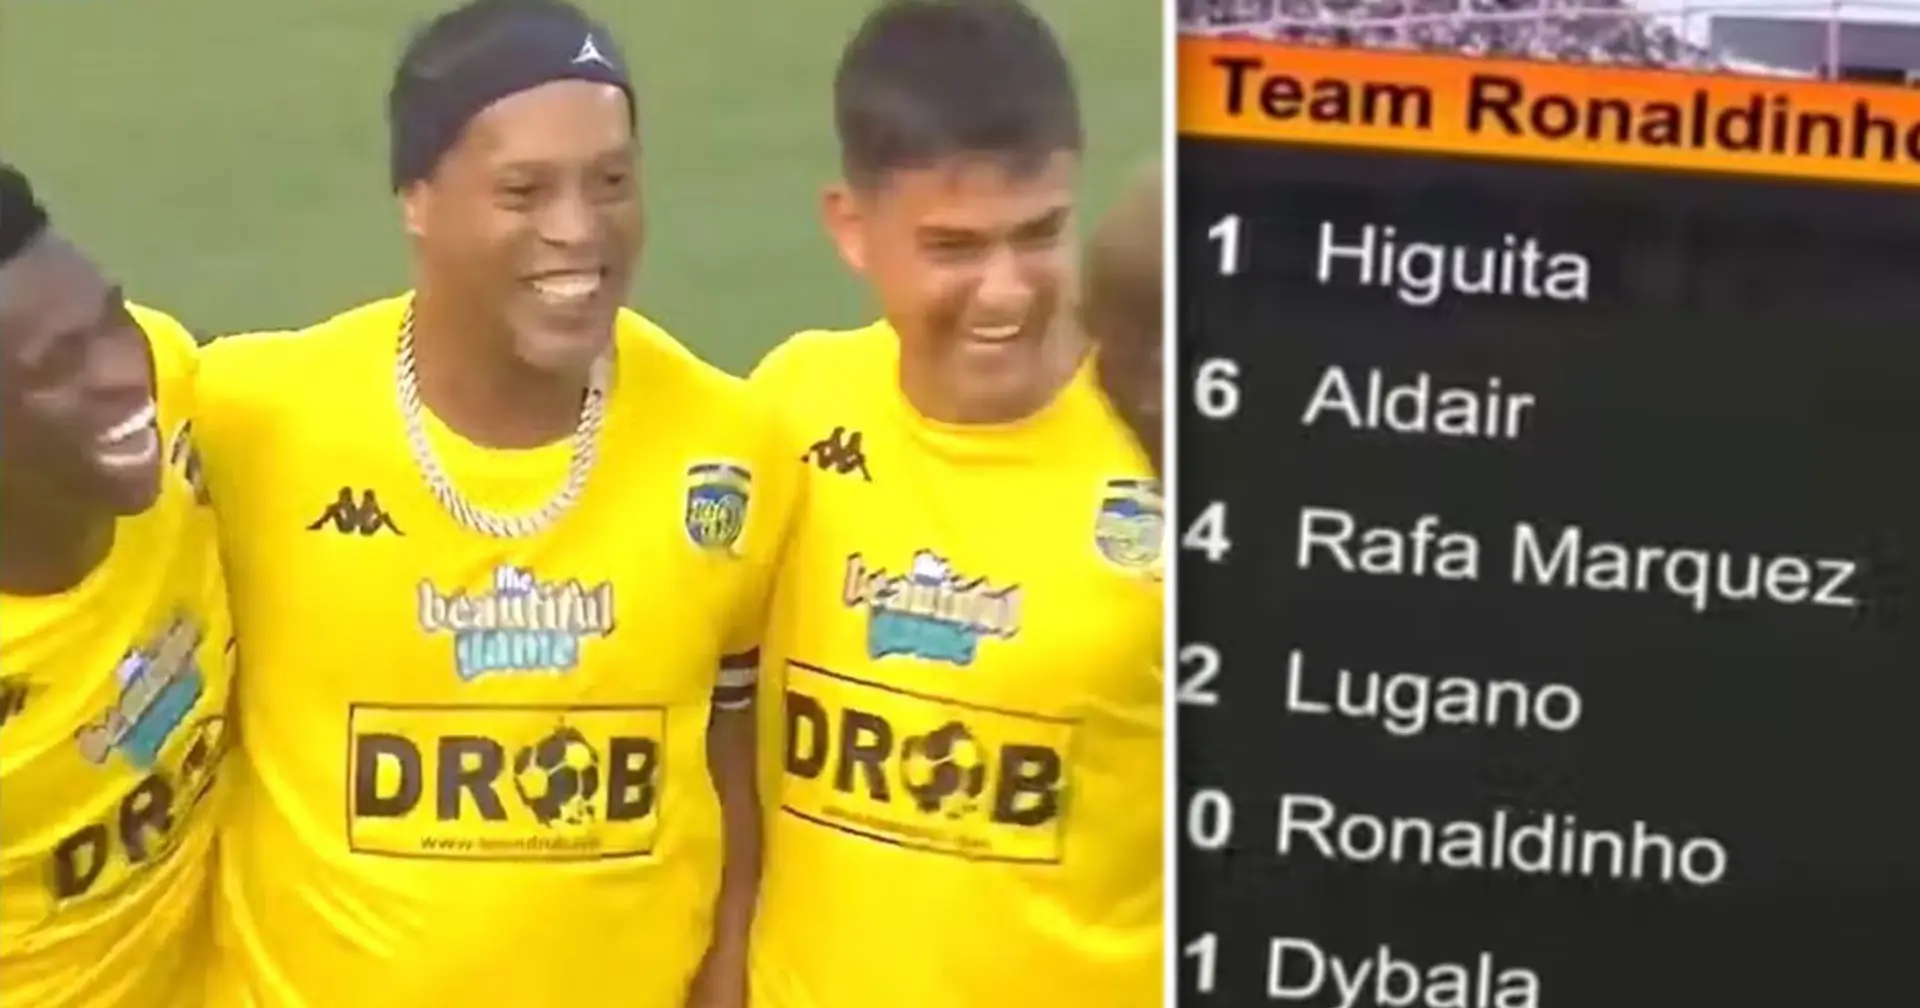 Ronaldinho takes on Roberto Carlos in exhibition match: squads and final result